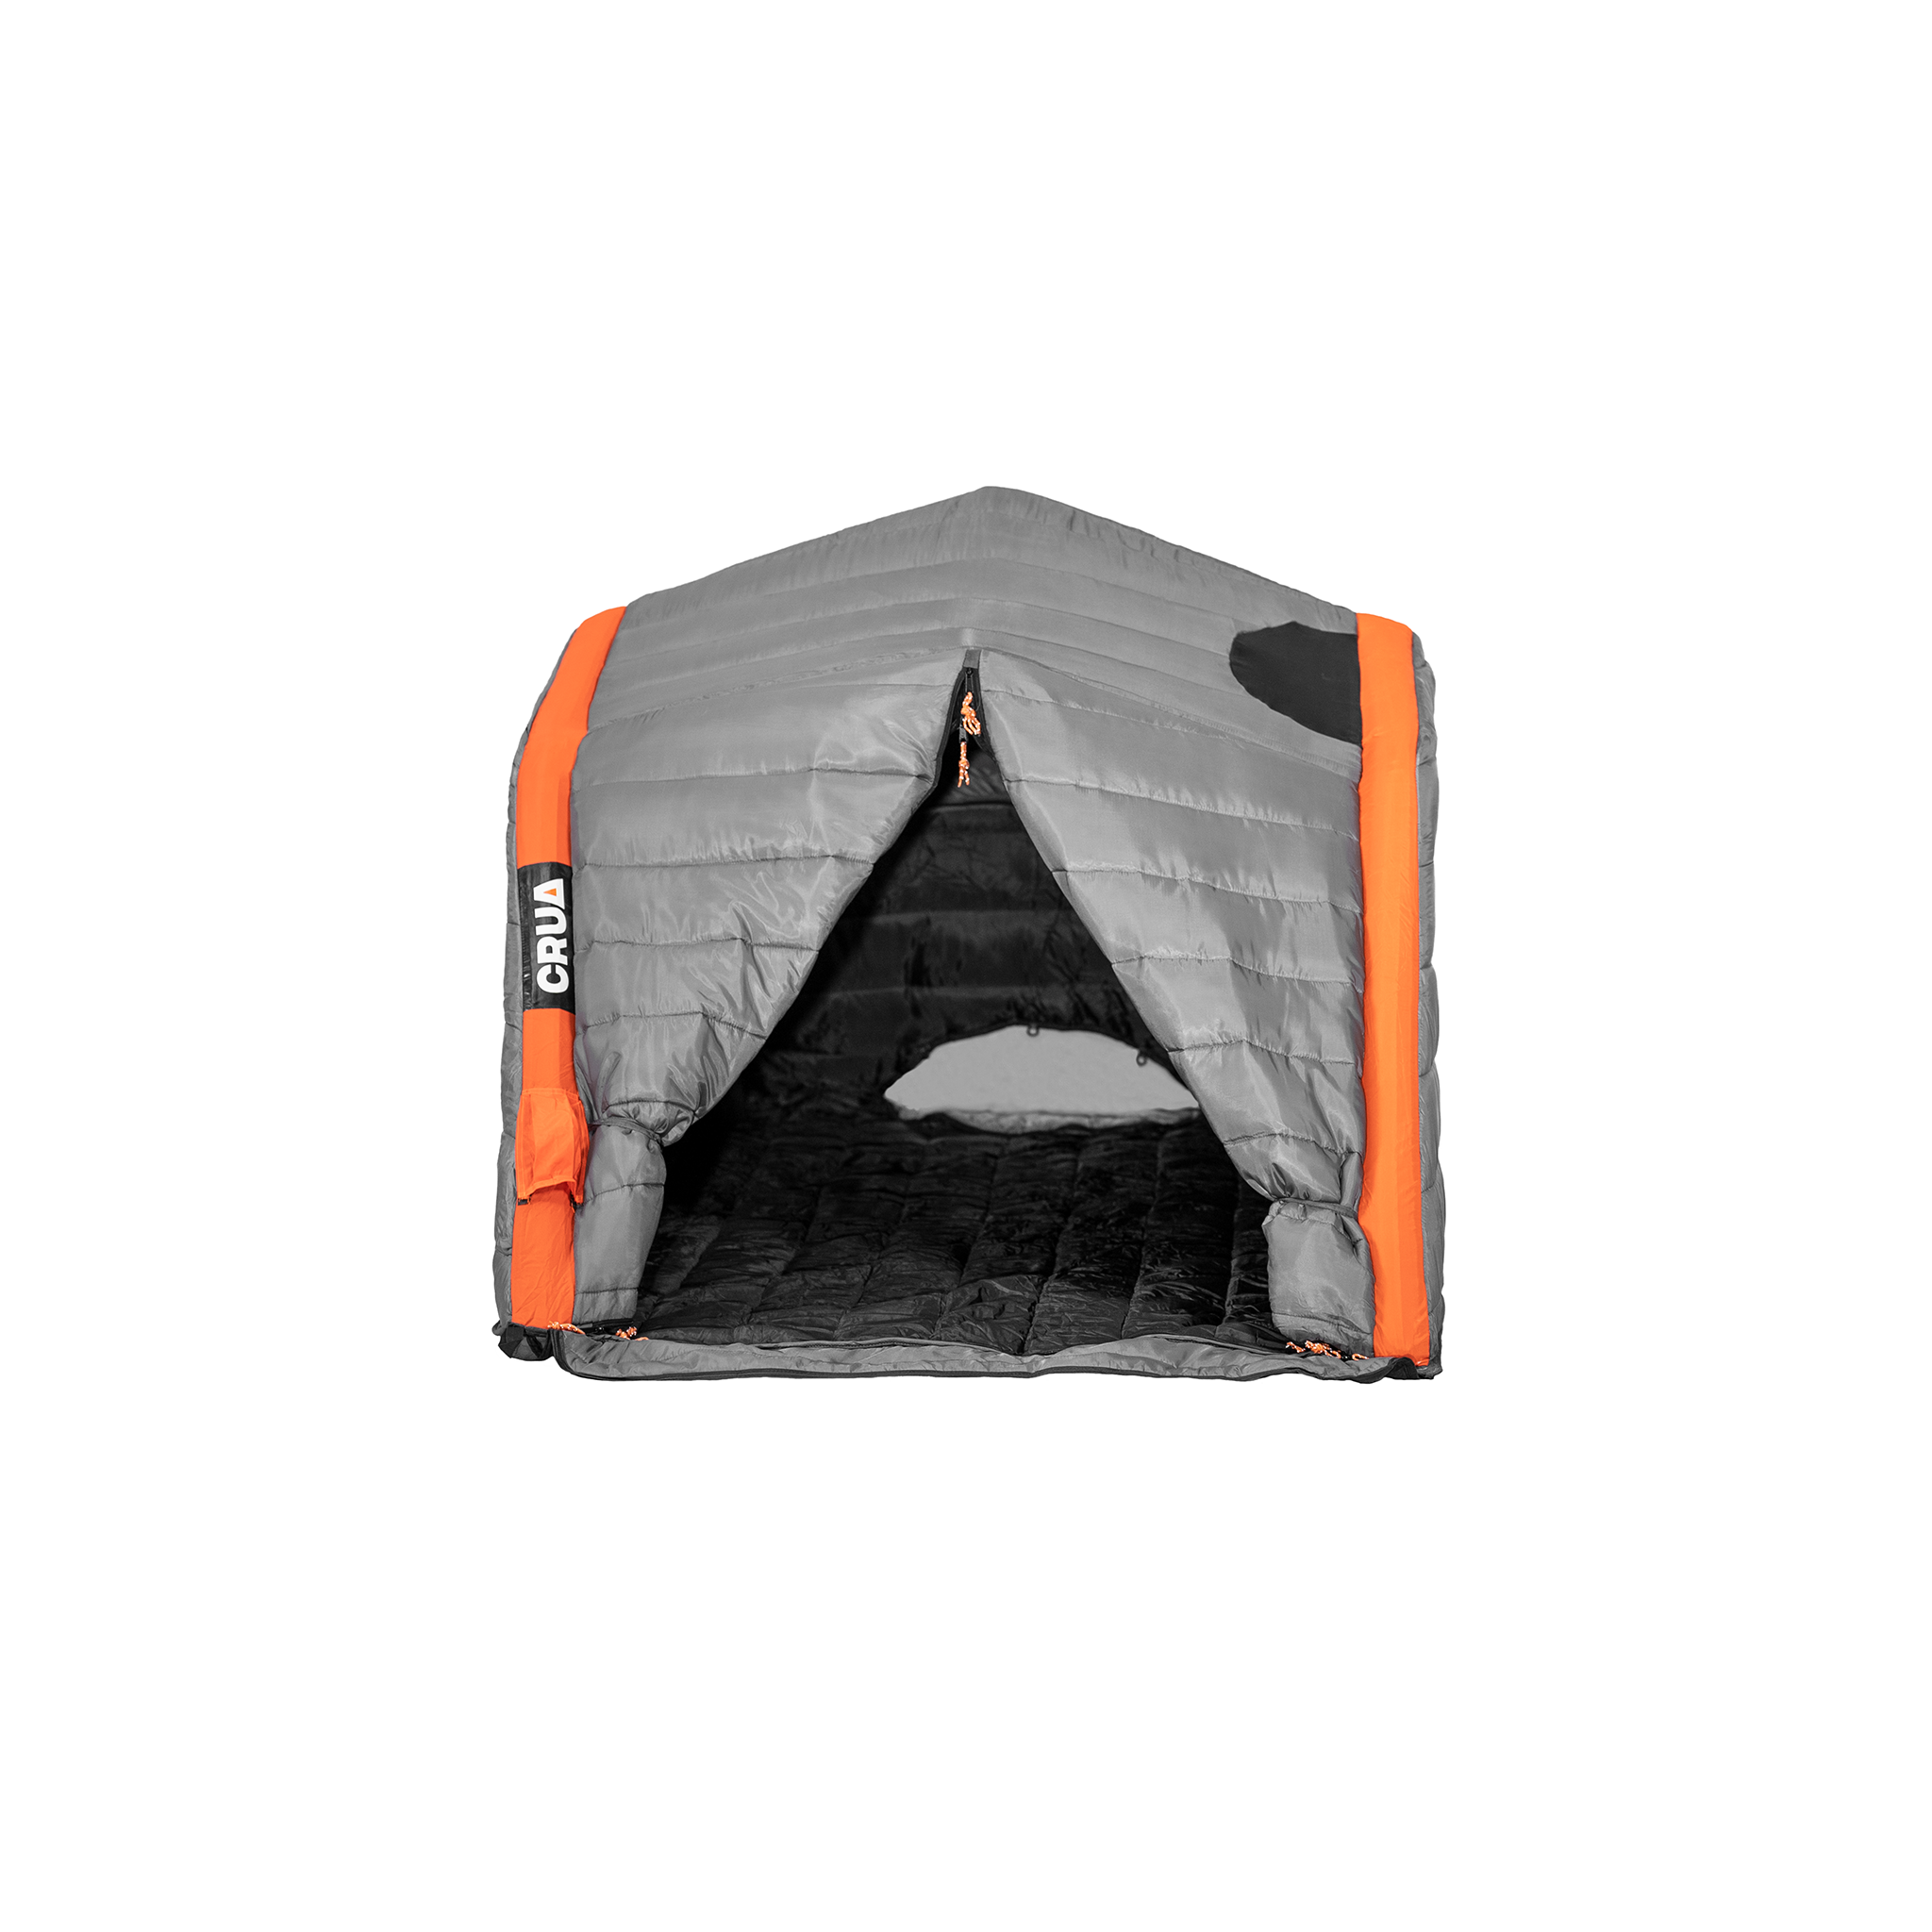 Culla Haul Maxx | 3 Person Insulated Inner Tent With Temperature Regulating, Noise Dampening And Light Blocking Features